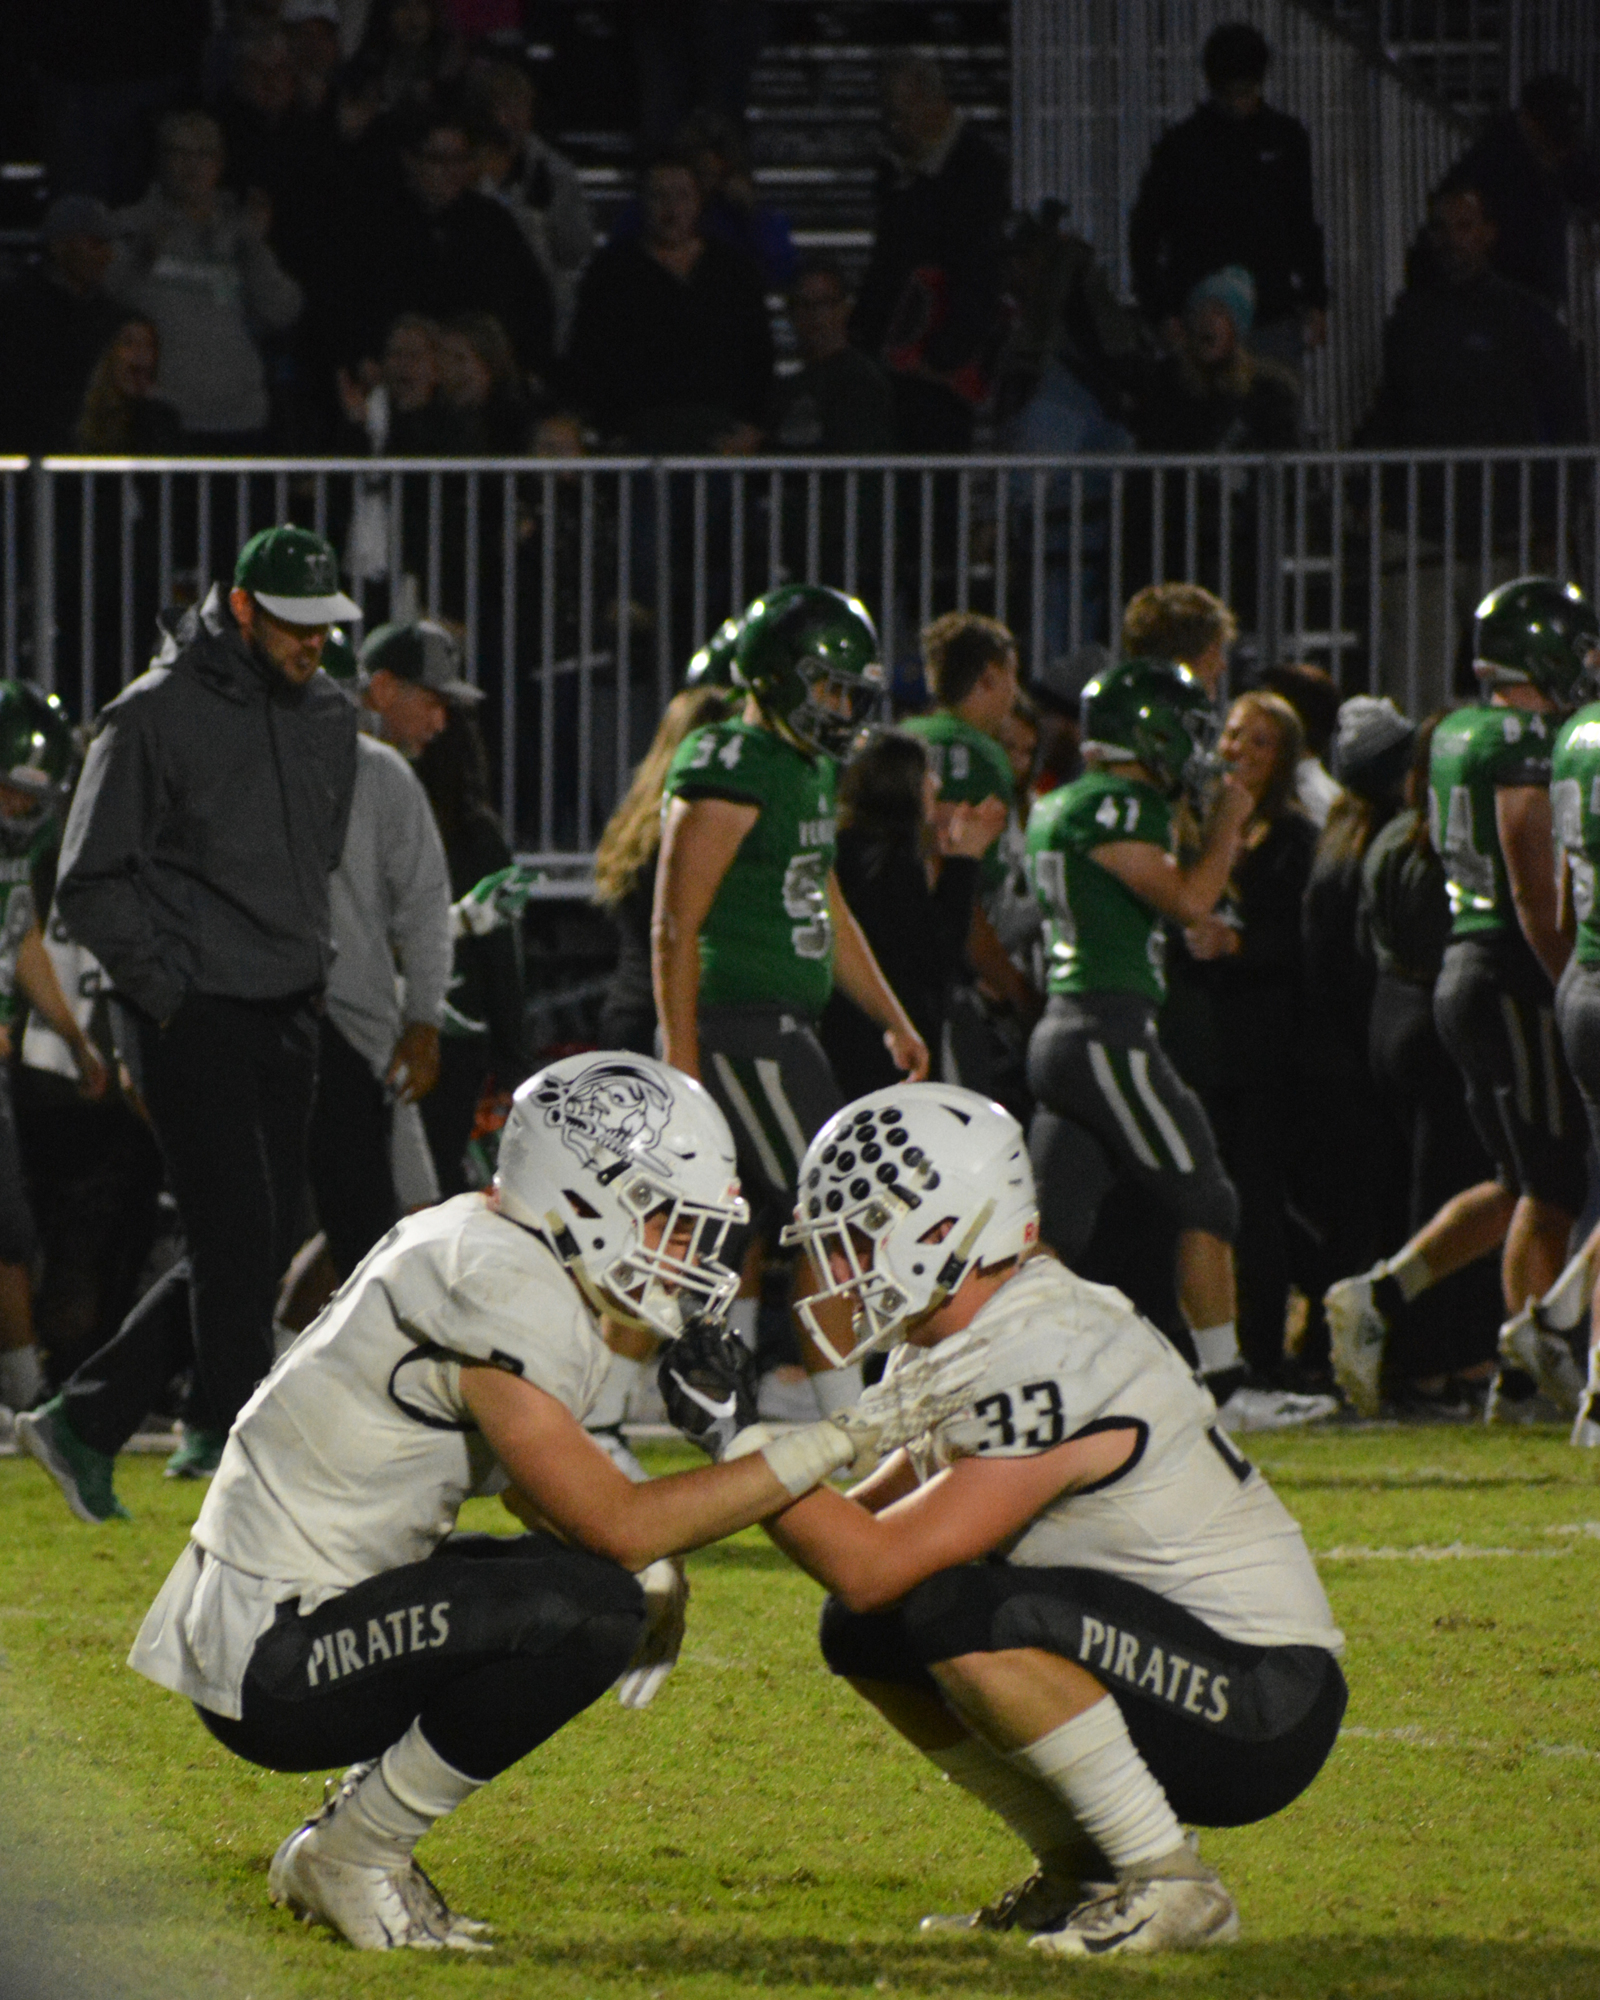 Braden River junior Noah Font consoles senior Jackson Dietz after the final whistle. The Pirates lost 28-21 to Venice.